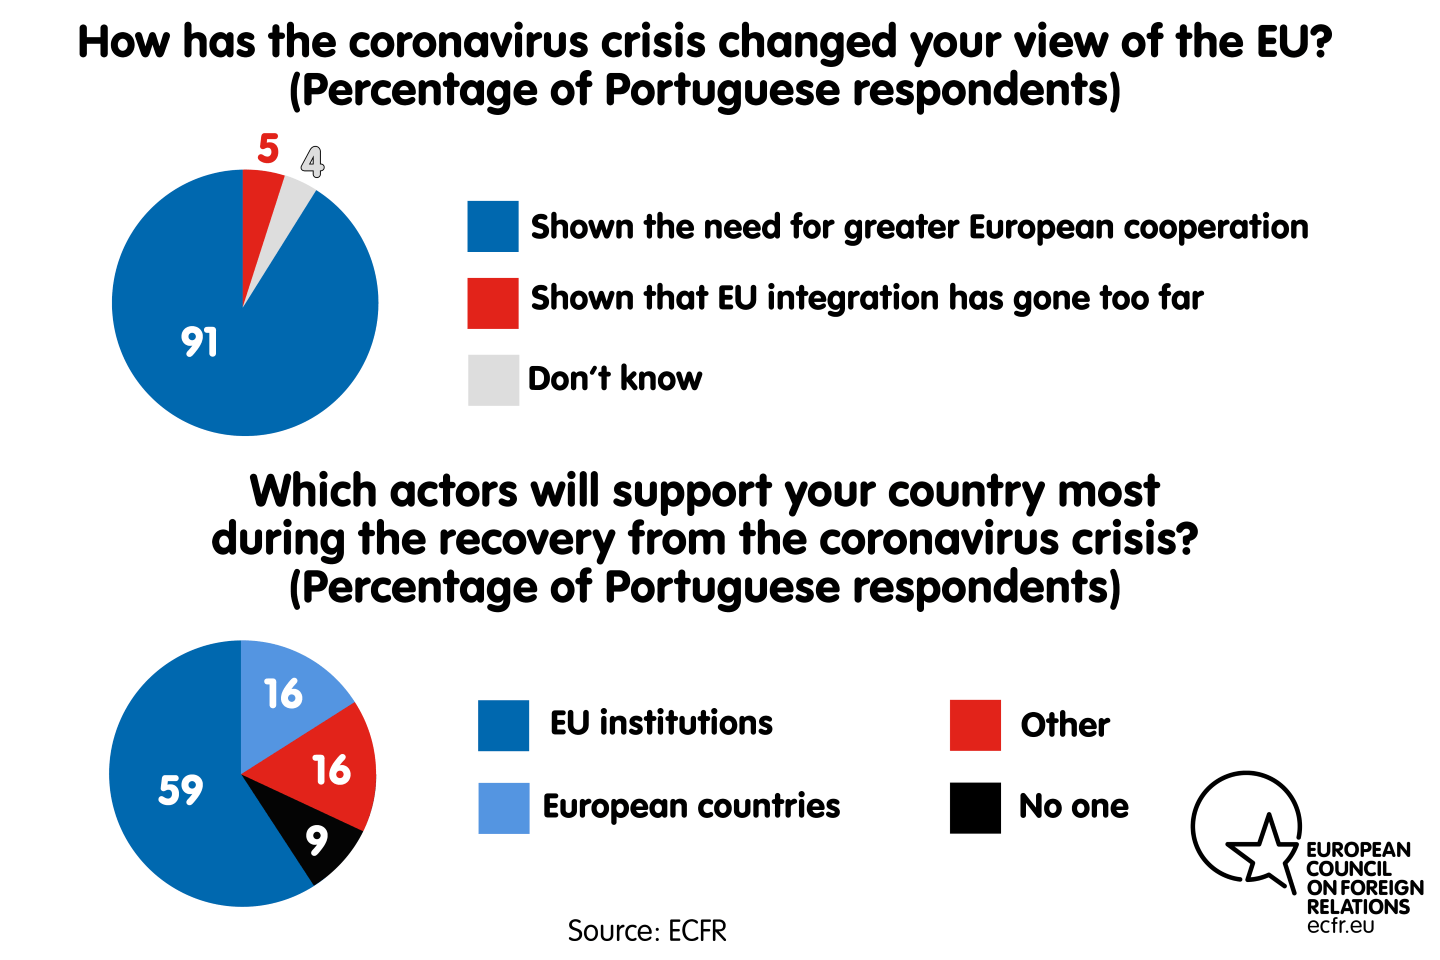 Has the coronavirus crisis changed your view of the EU? Which actors will support your country most during the recovery?